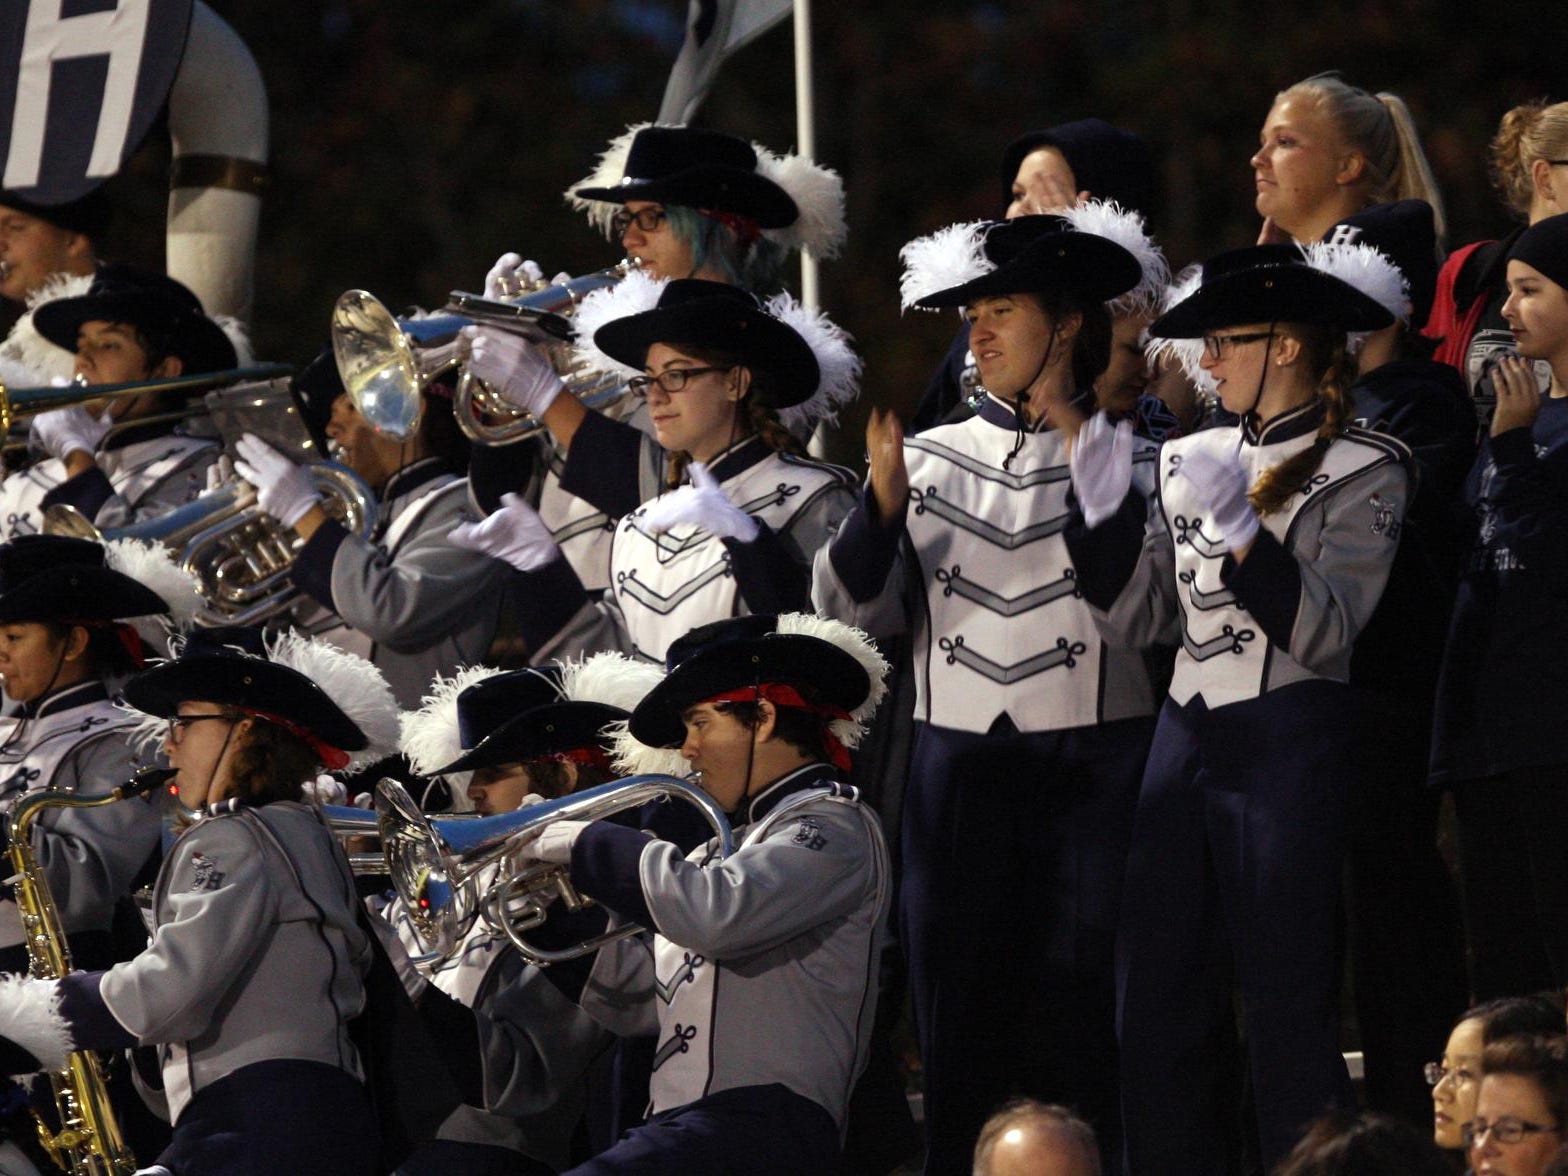 The Howell band plays as their team plays Freehold Township in a football game Friday, September 25, 2015, at Howell High School.